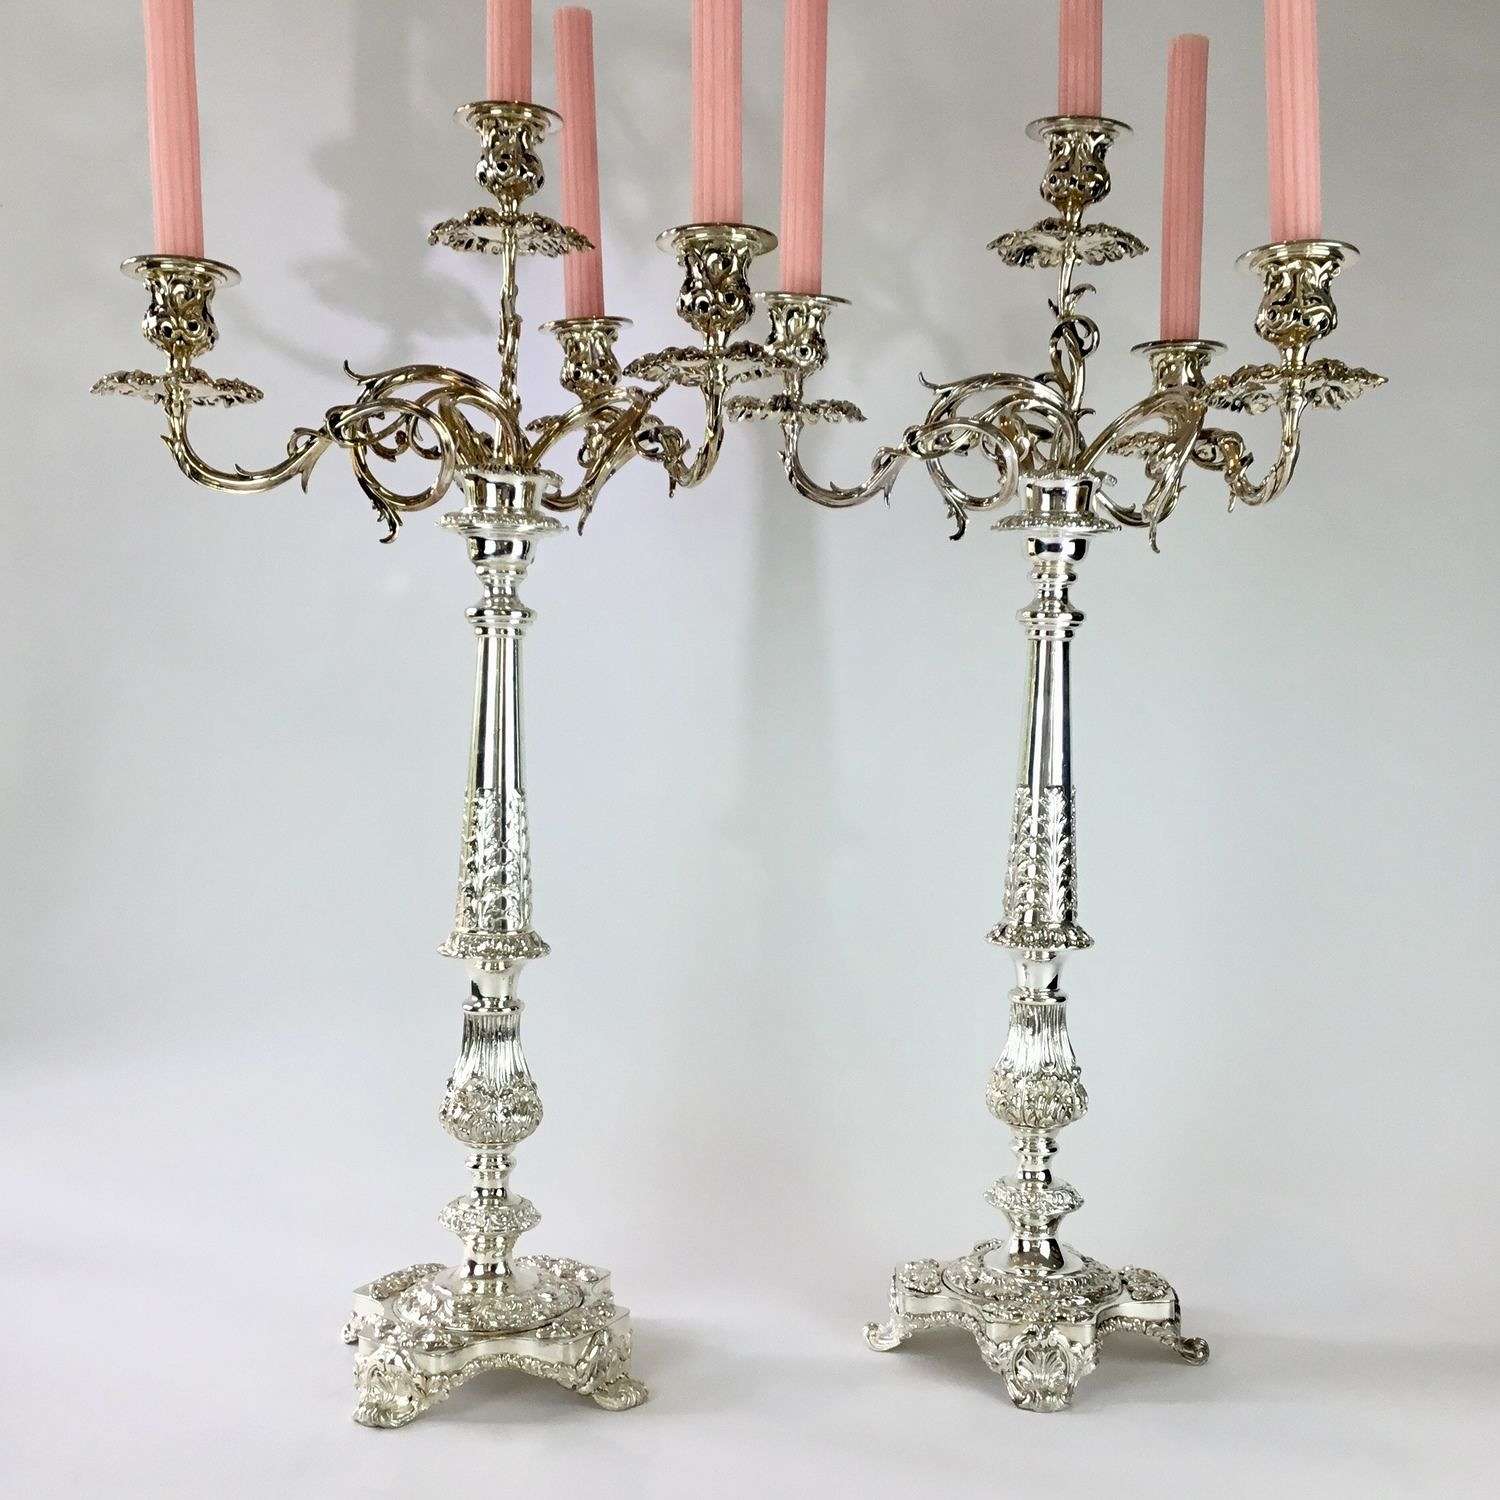 Magnificent pair of early Victorian tall candelabra